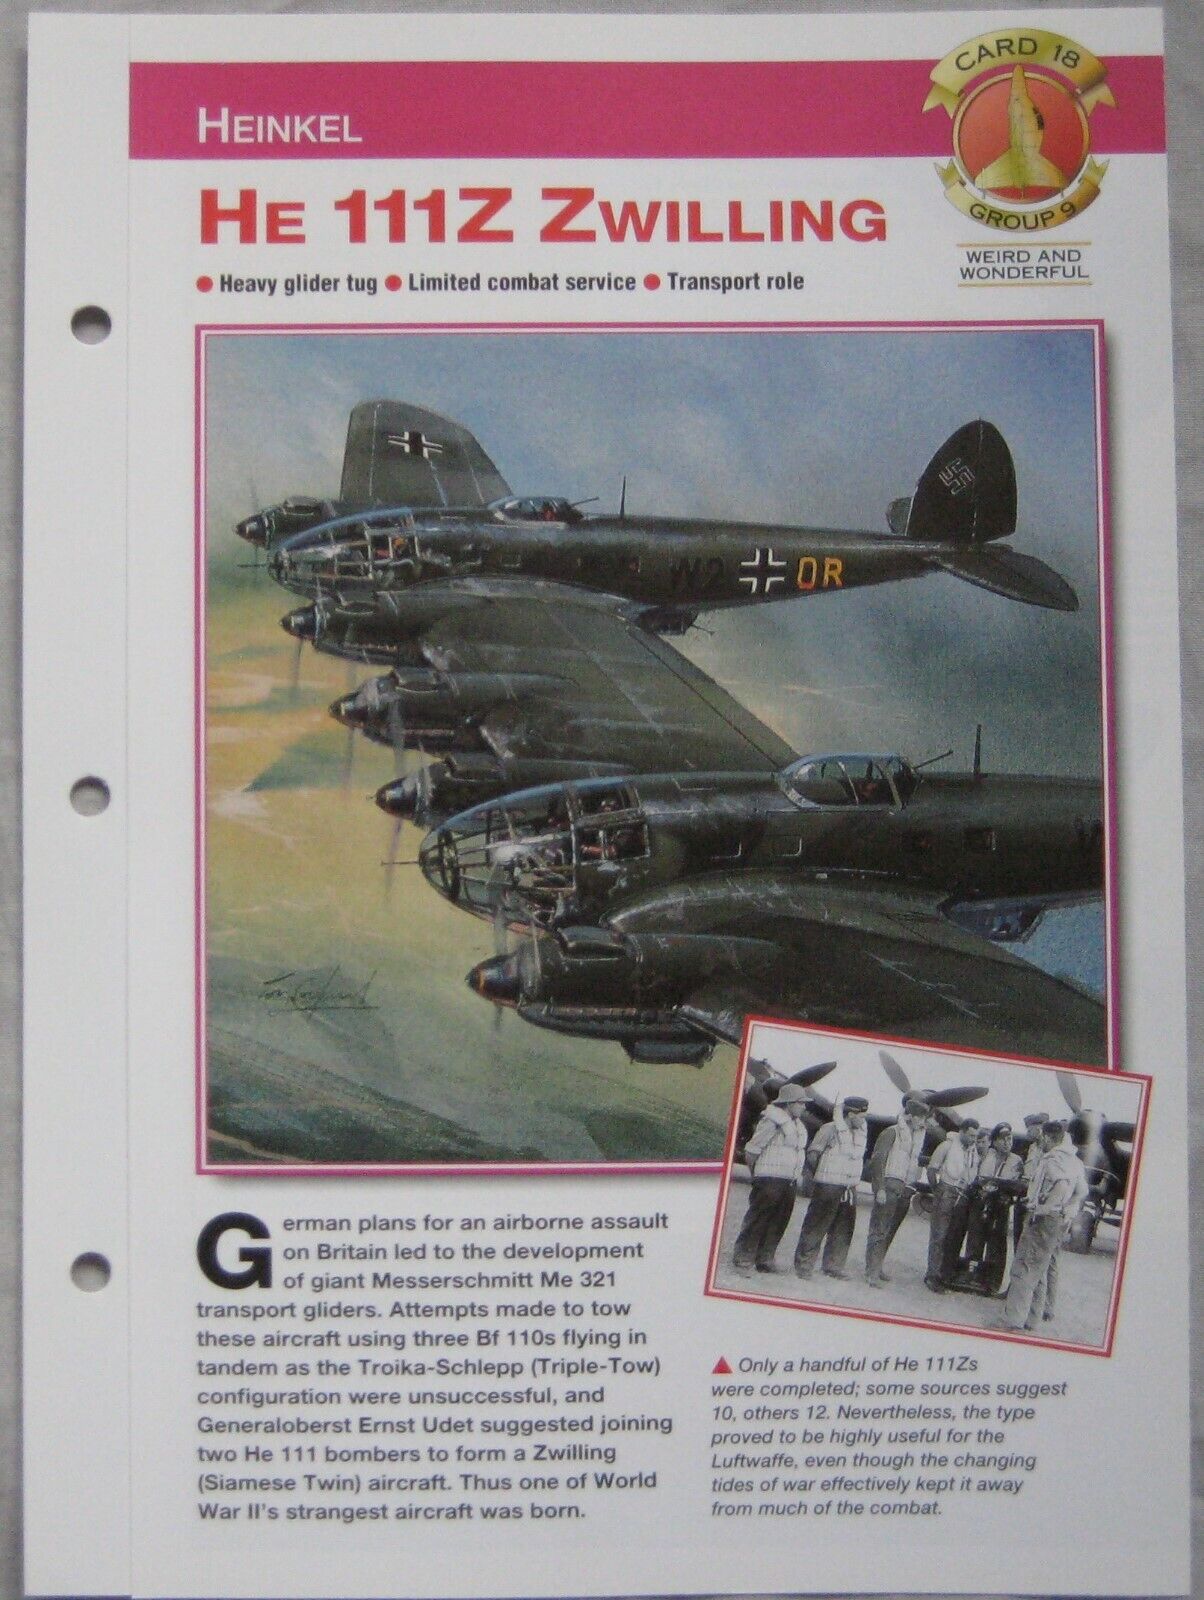 Aircraft of the World Card 18 , Group 9 - Heinkel He 111Z Zwilling